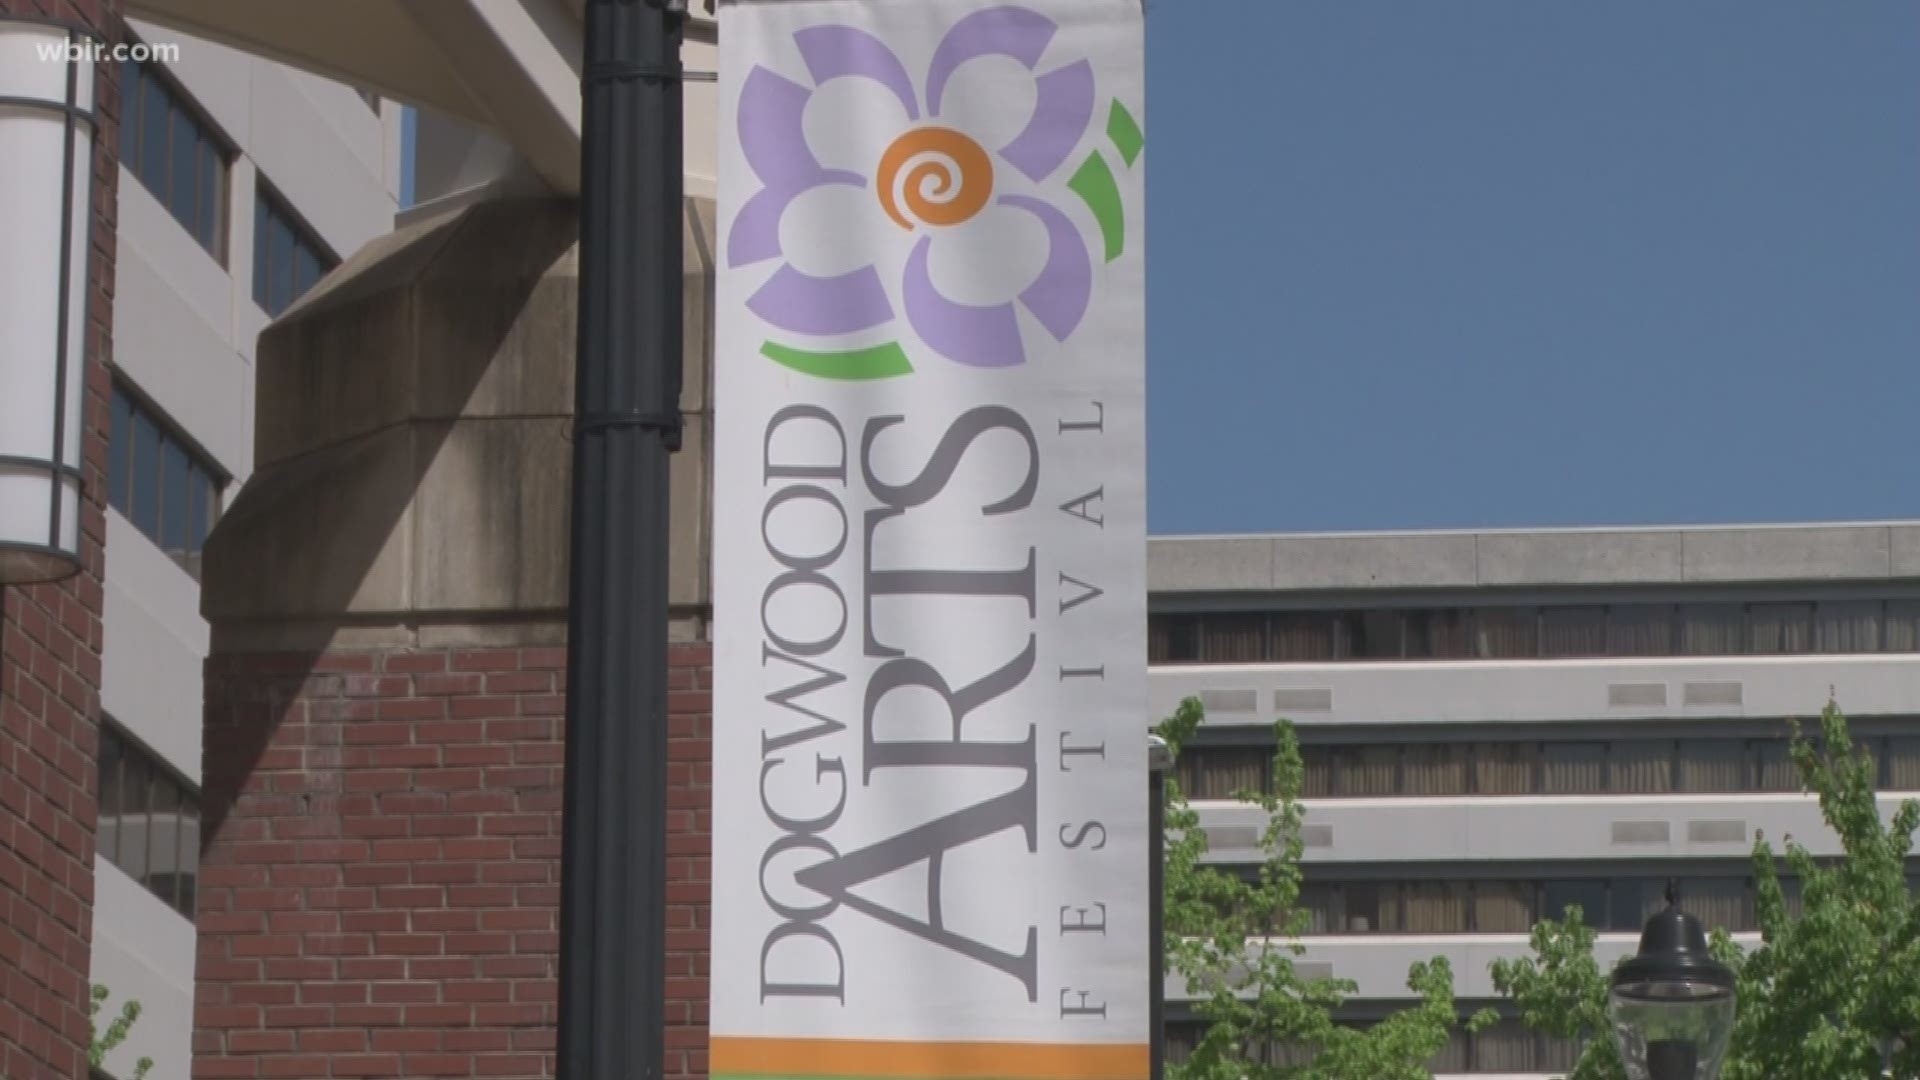 The 58th annual Dogwood Arts Festival will be held April 26-28, 2019 in downtown Knoxville. Festival Hours: Friday: 10:00am-8:00pm (music until 10pm), Saturday: 10:00am–8:00pm (music until 10pm), and Sunday: 10:00am–5:00pm (music starts at 11am). April 23, 2019-4pm